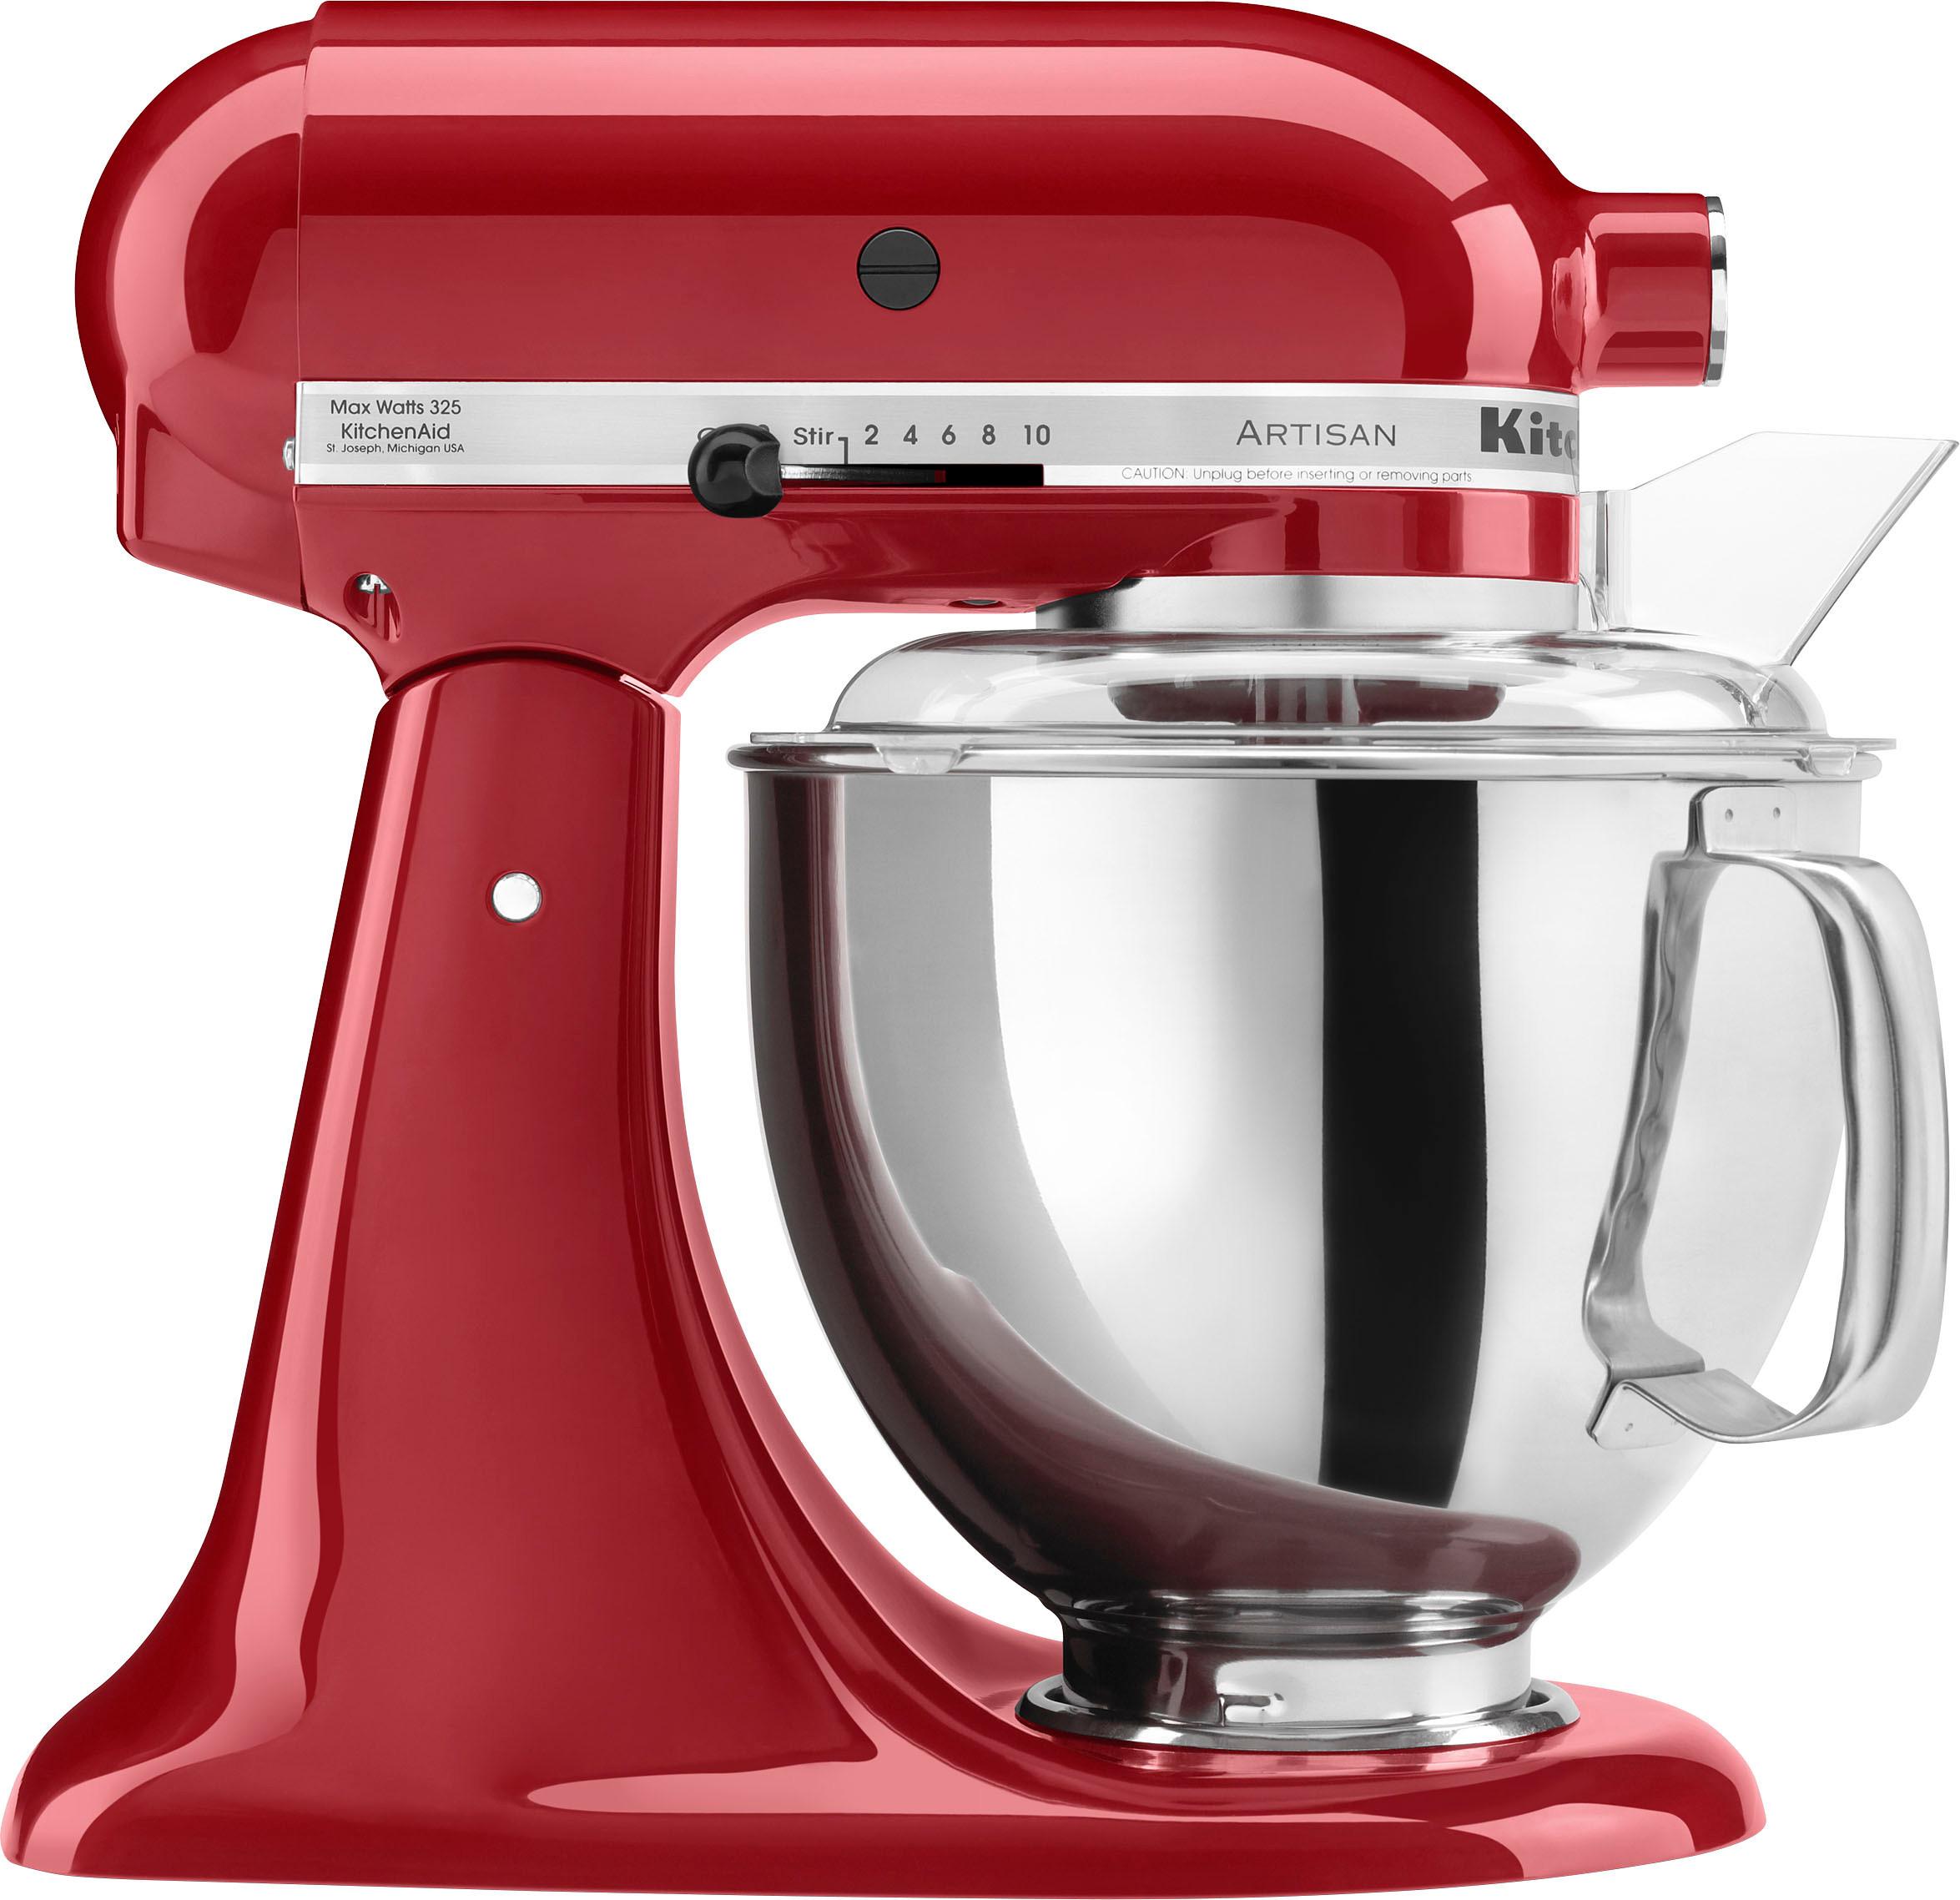 SALE: Get 25% off KitchenAid appliances (including stand mixers)